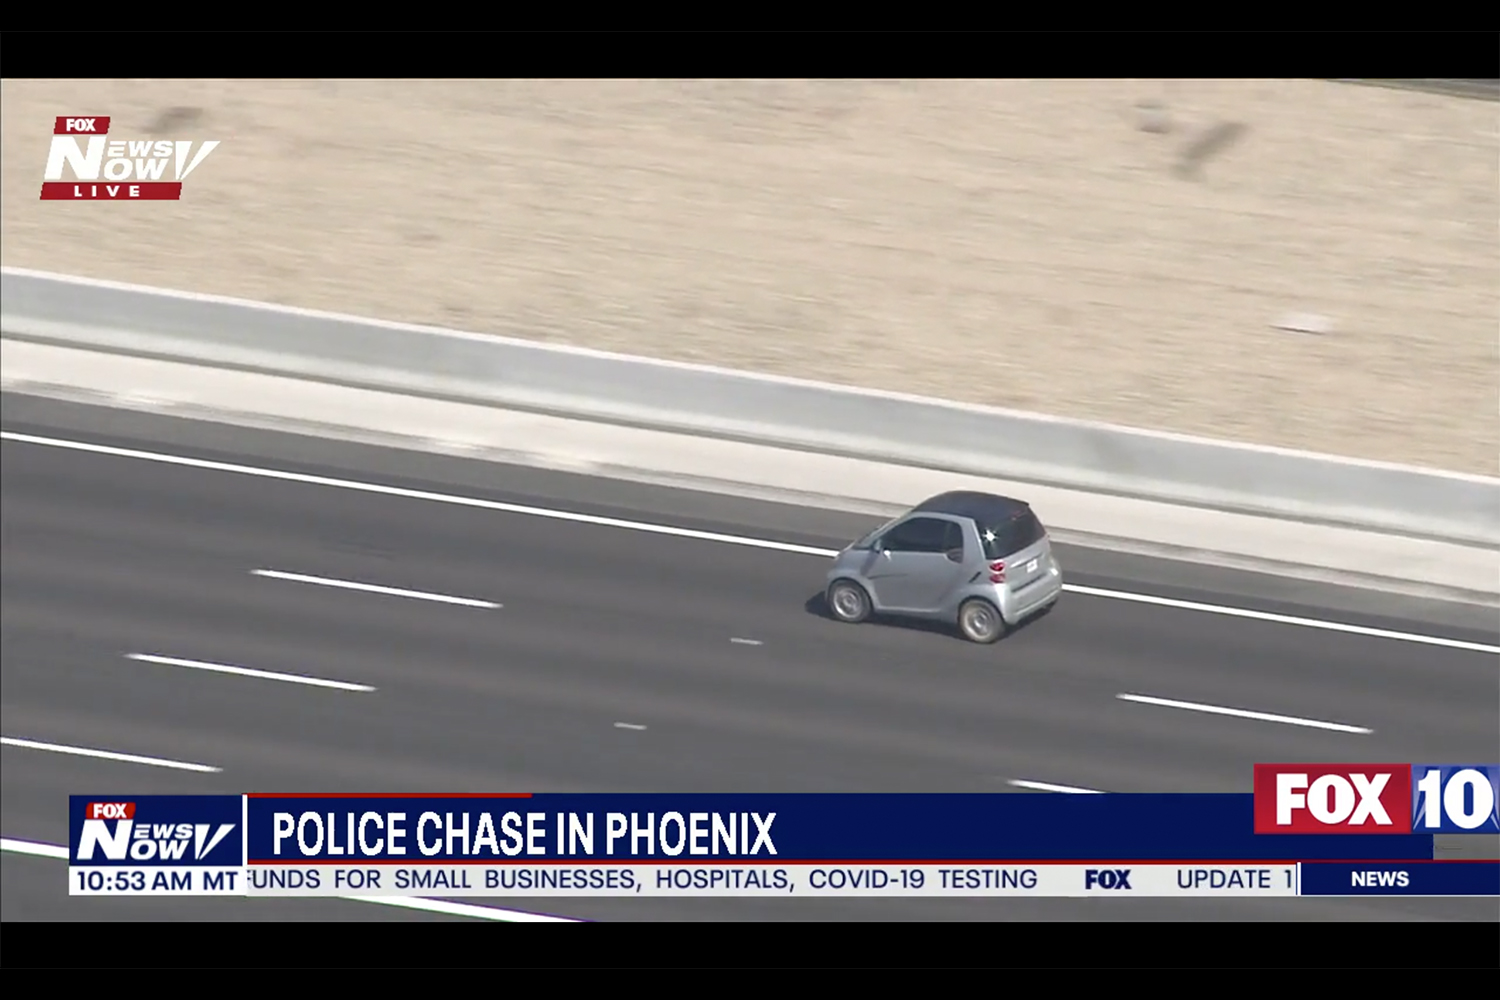 Smart Car Fortwo outruns police in Phoenix chase